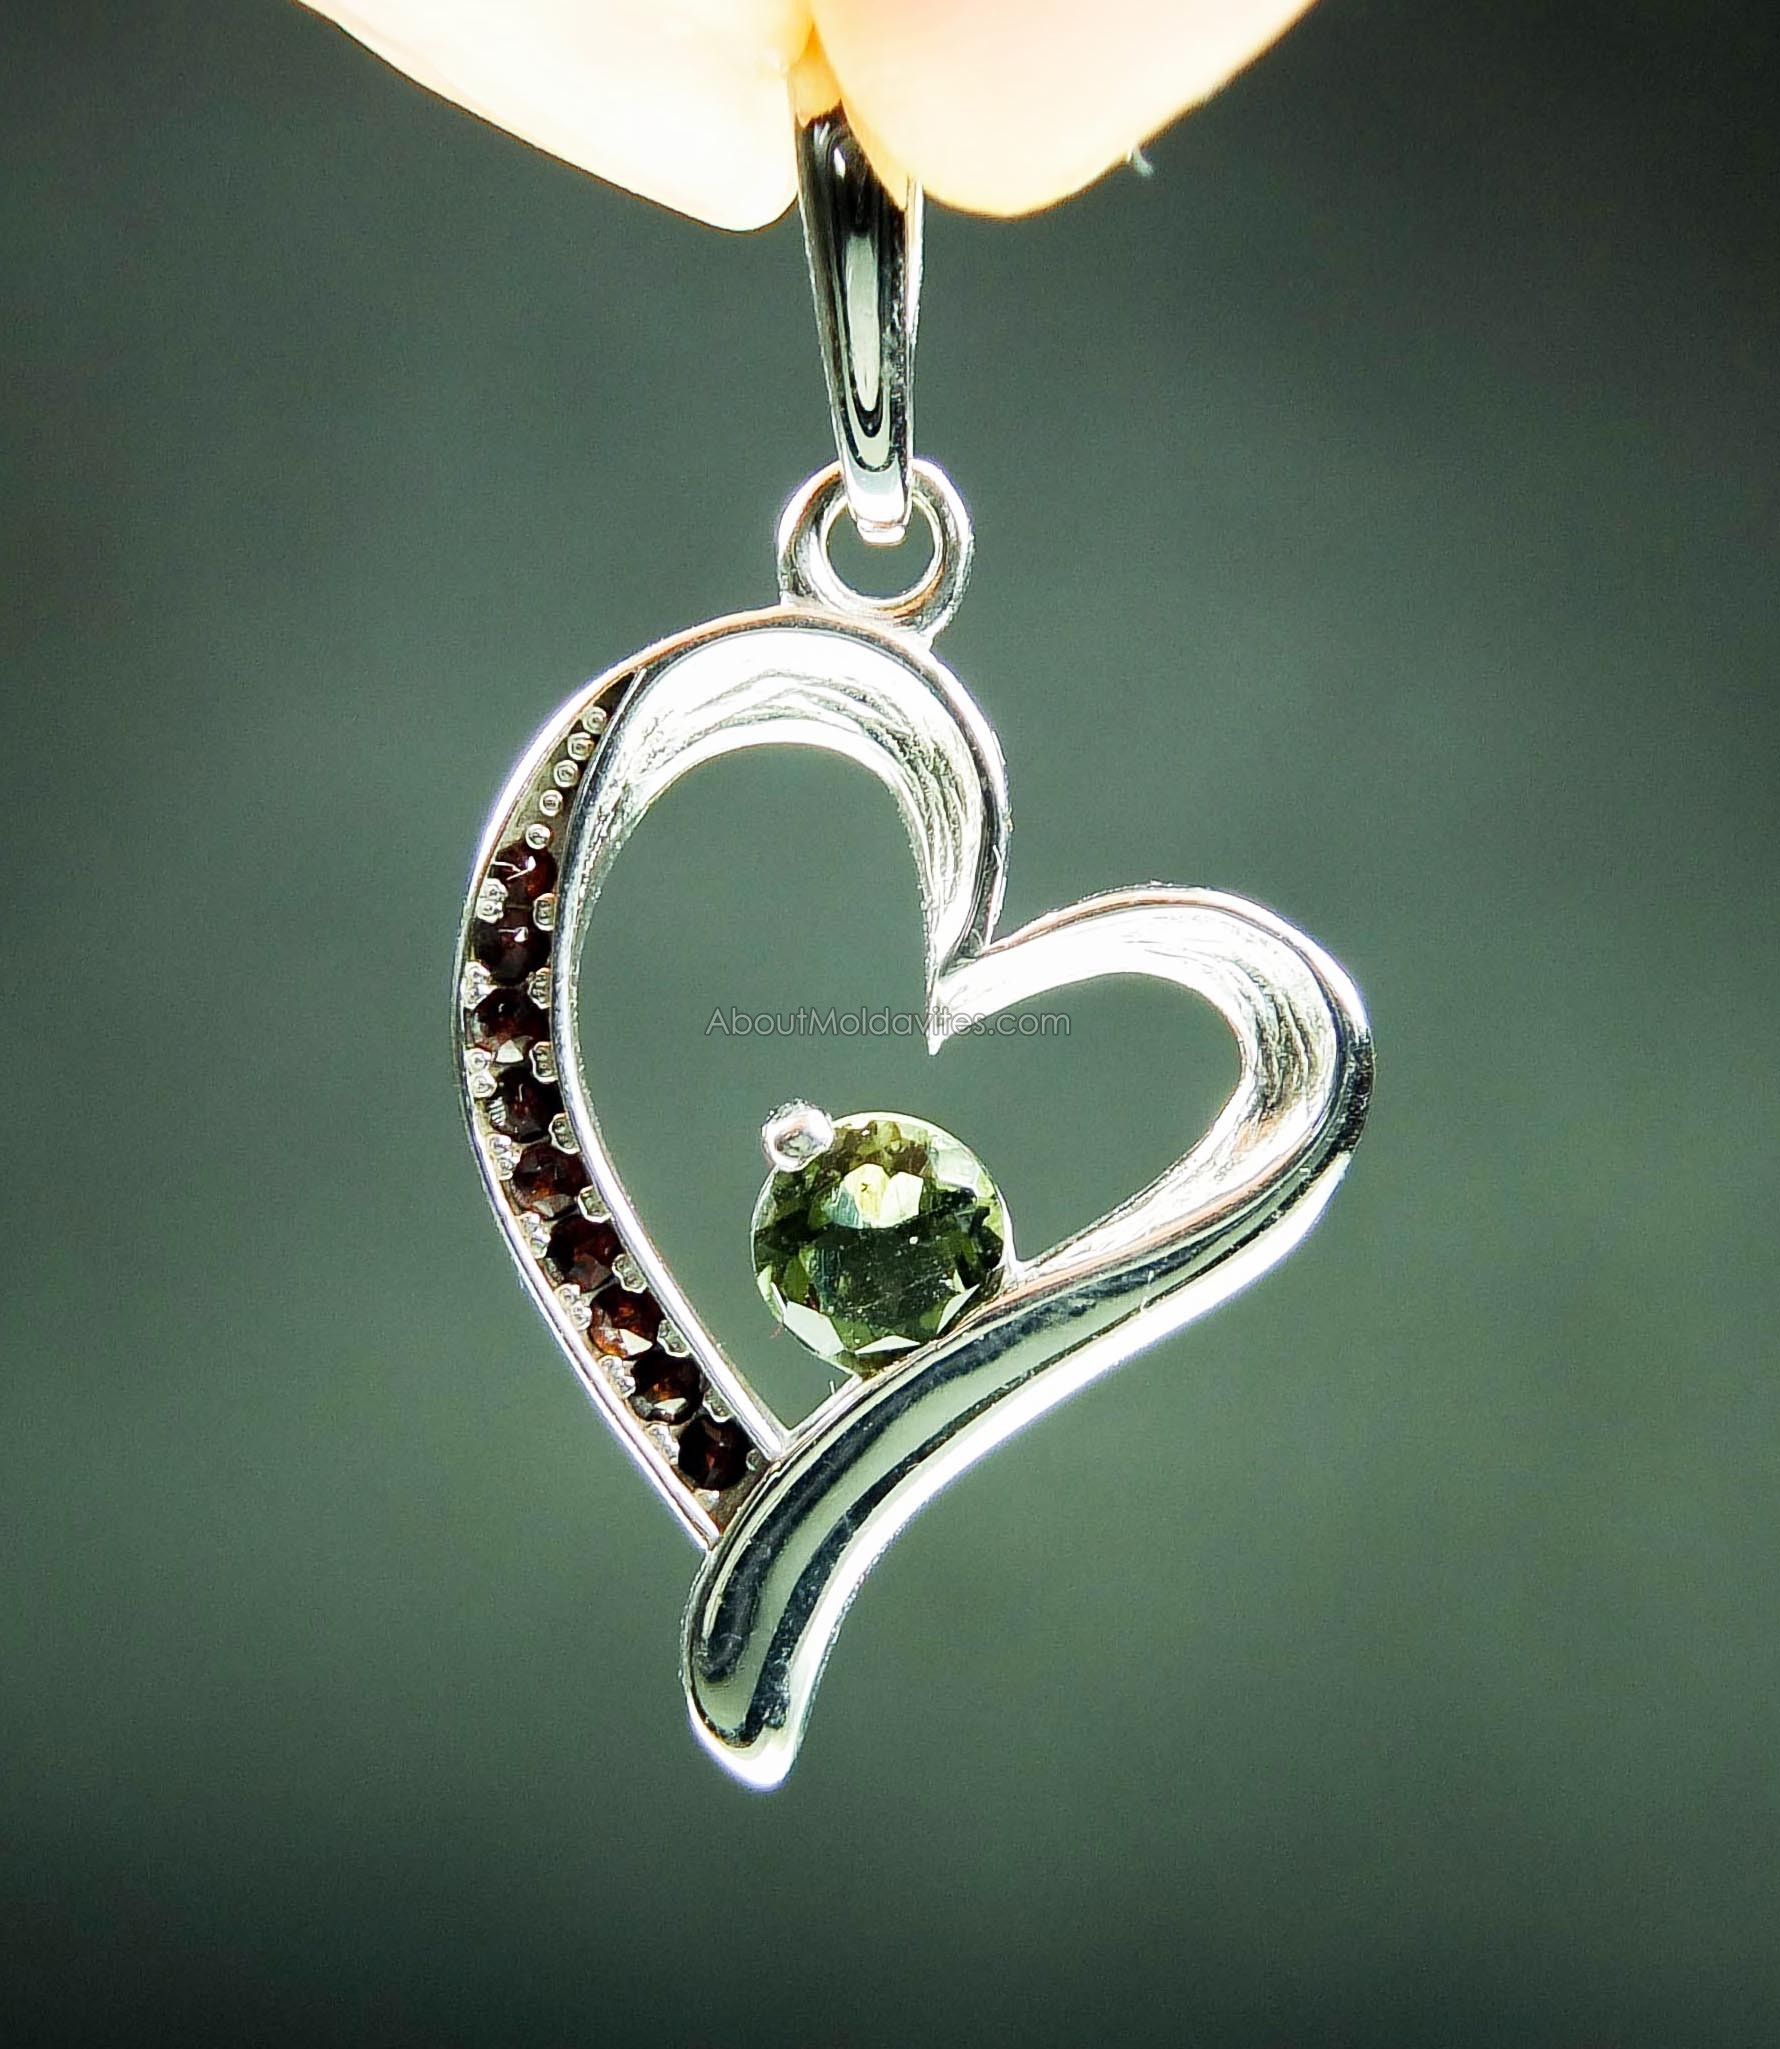 Pendant with faceted moldavite and garnets - heart